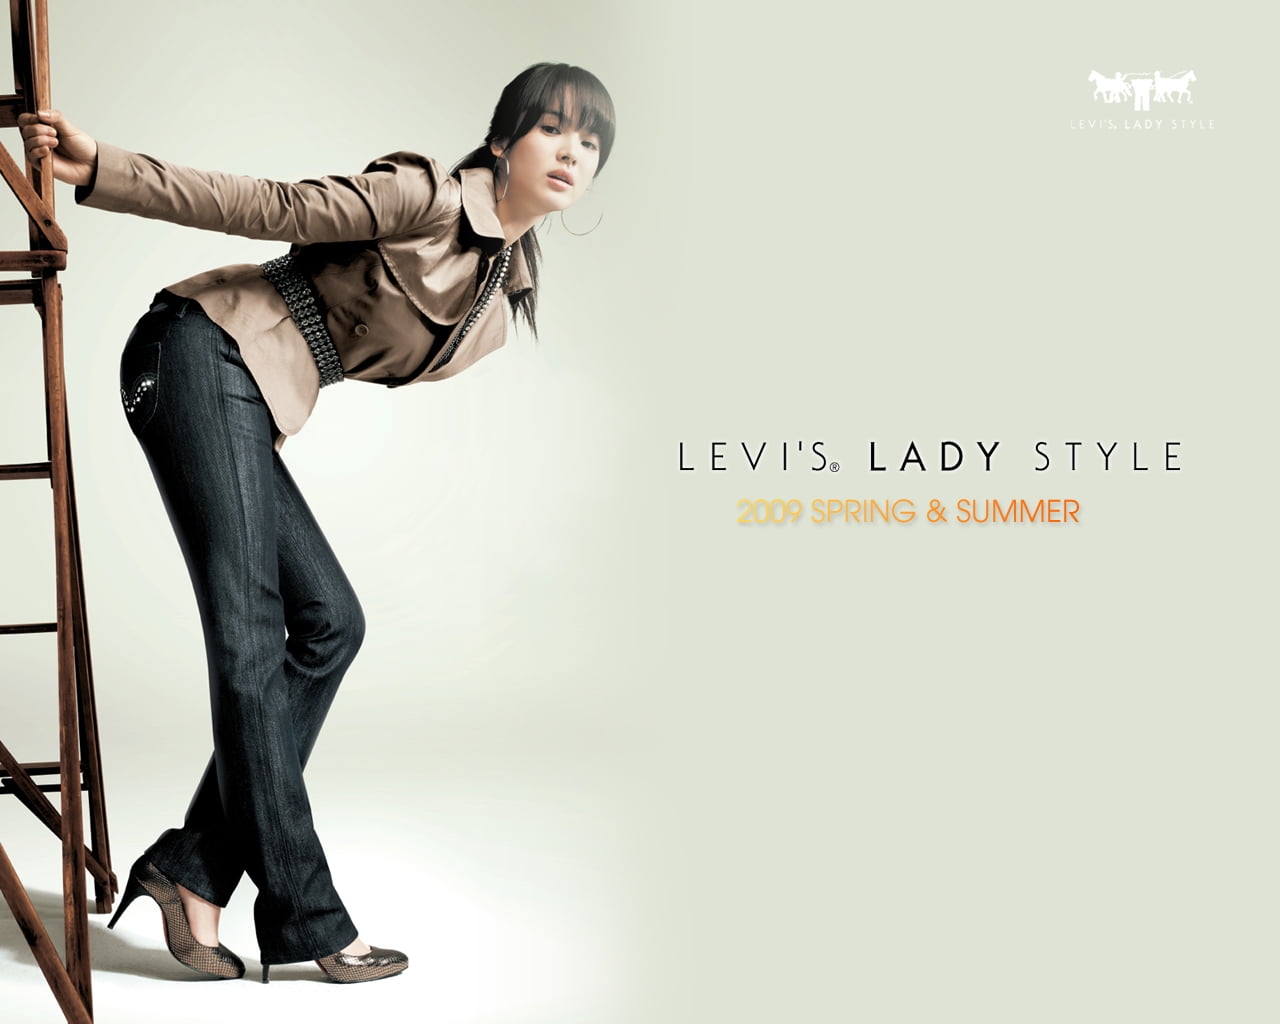 Levi's Lady Style poster HD wallpaper | Wallpaper Flare